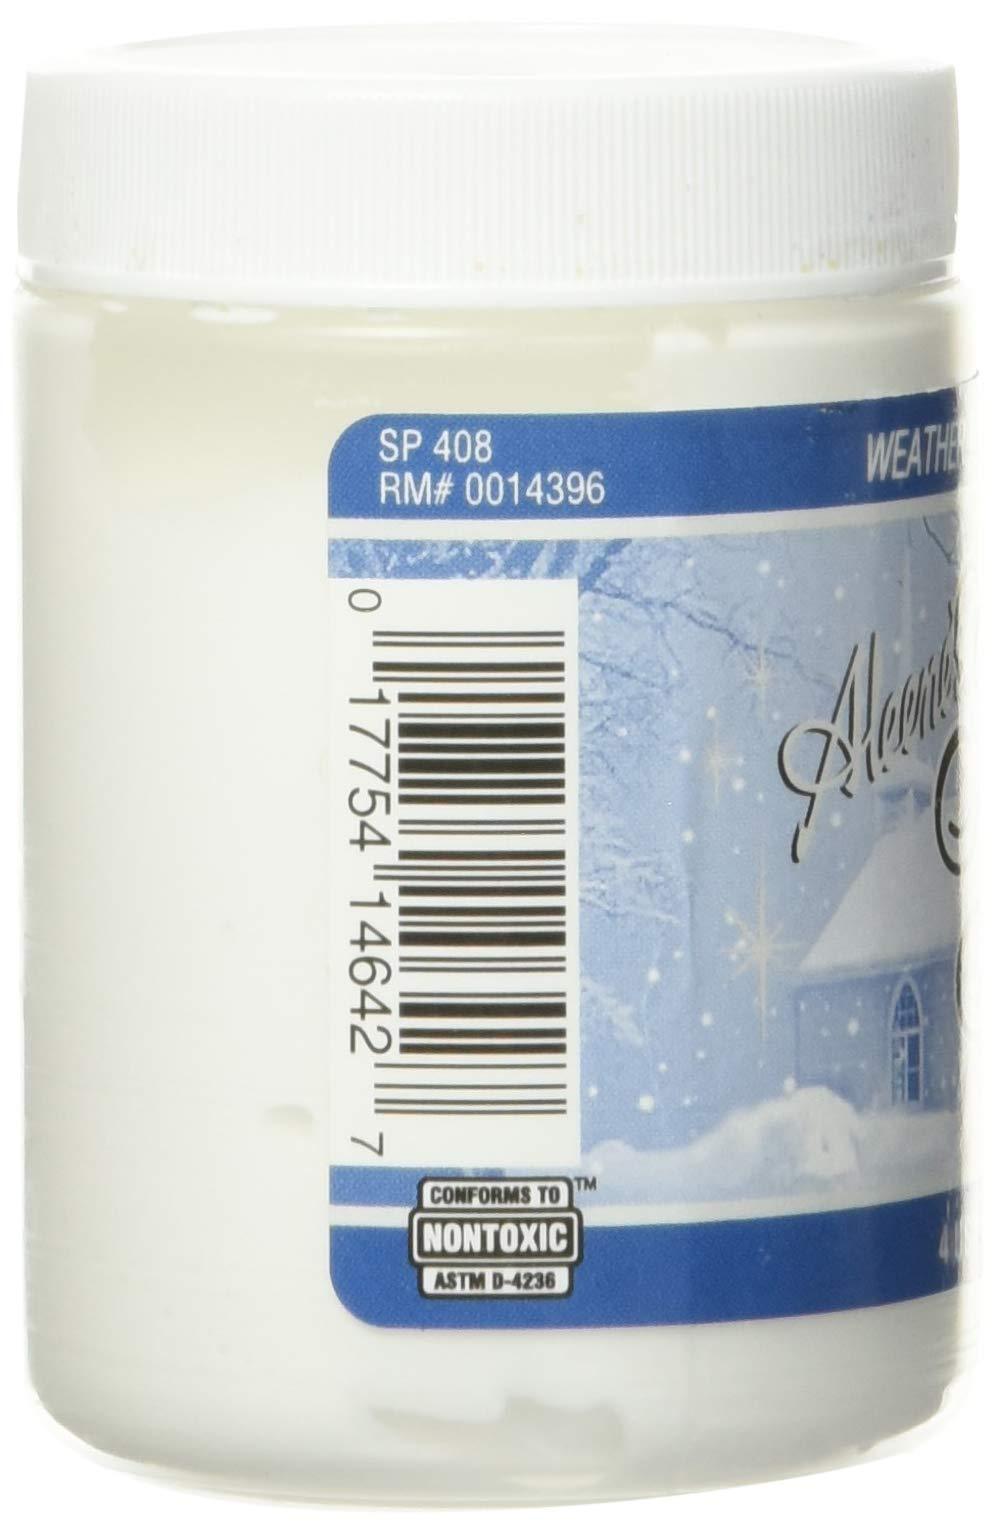 Aleene's Adhesives Bulk Buy Duncan Crafts Snow Glitter Paint 4 Ounces SP408 3-Pack - image 3 of 5